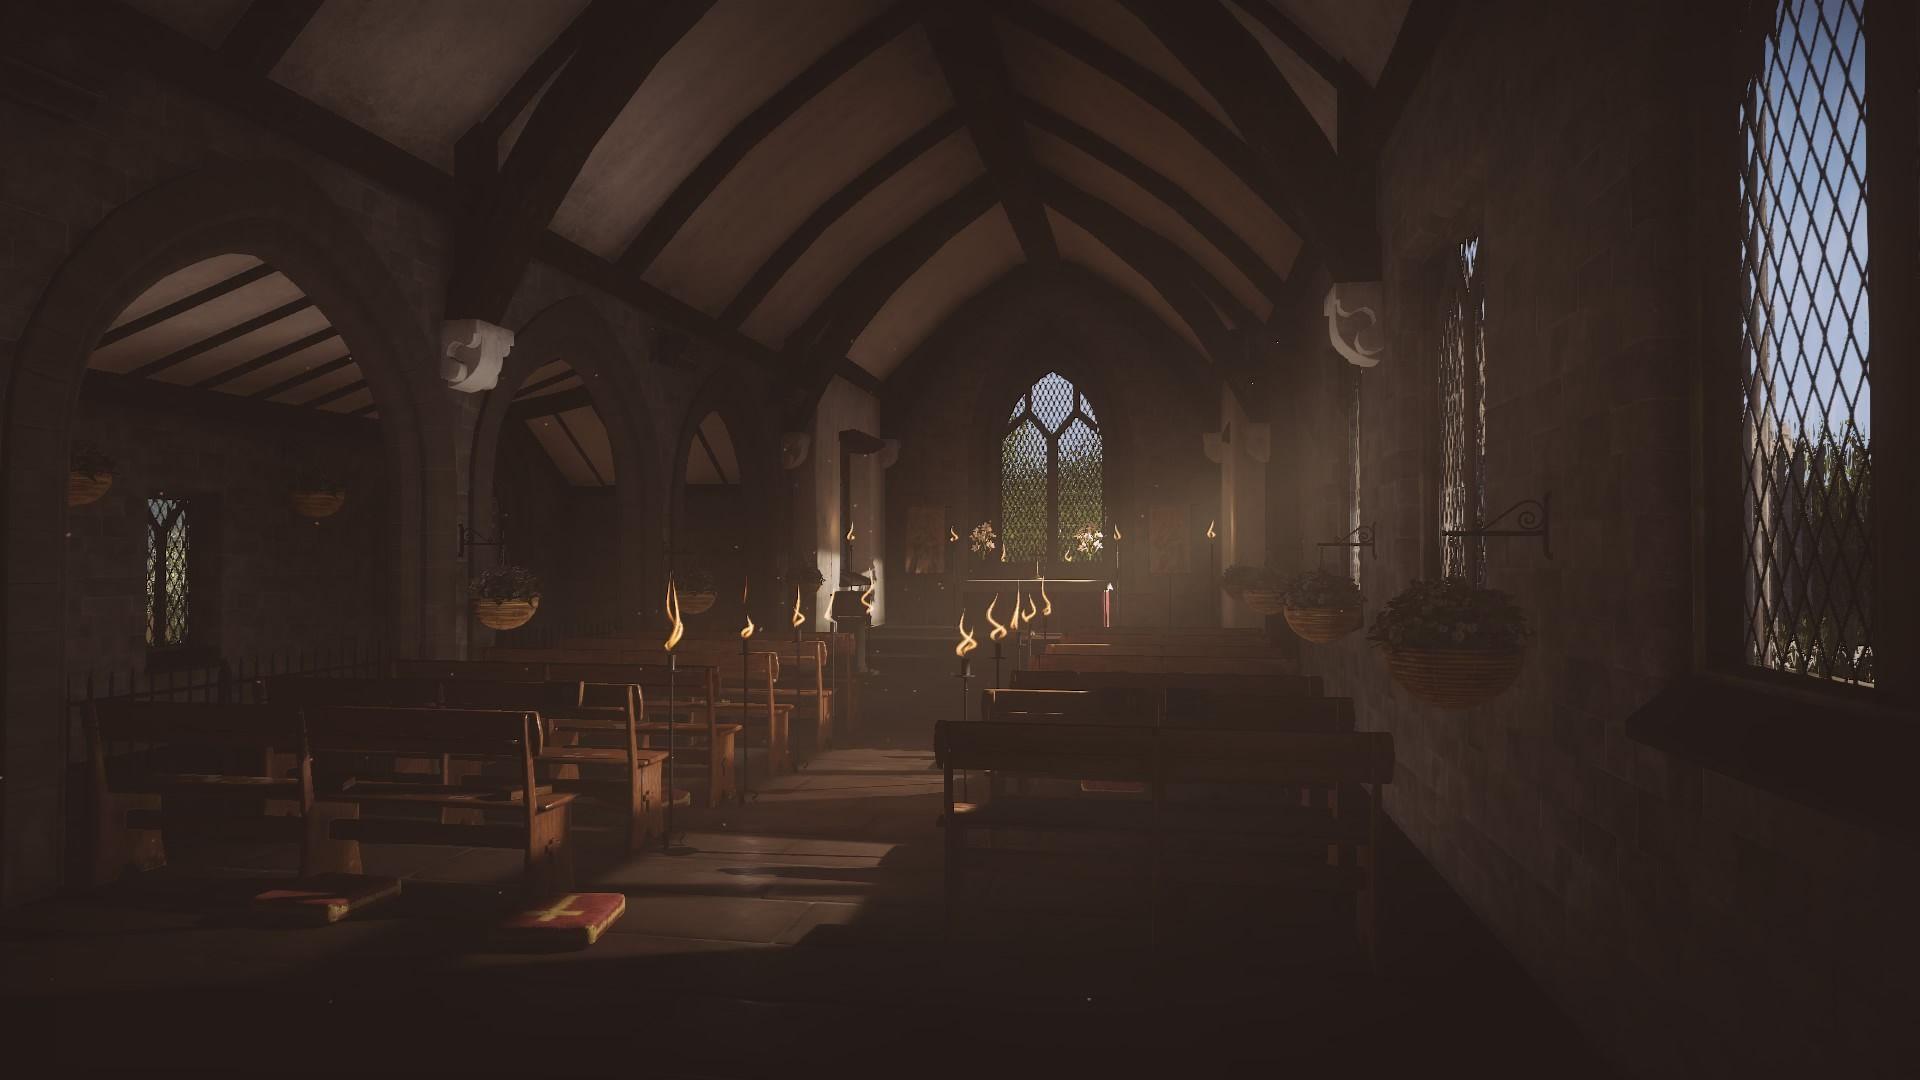 everybody gone to the rapture download free